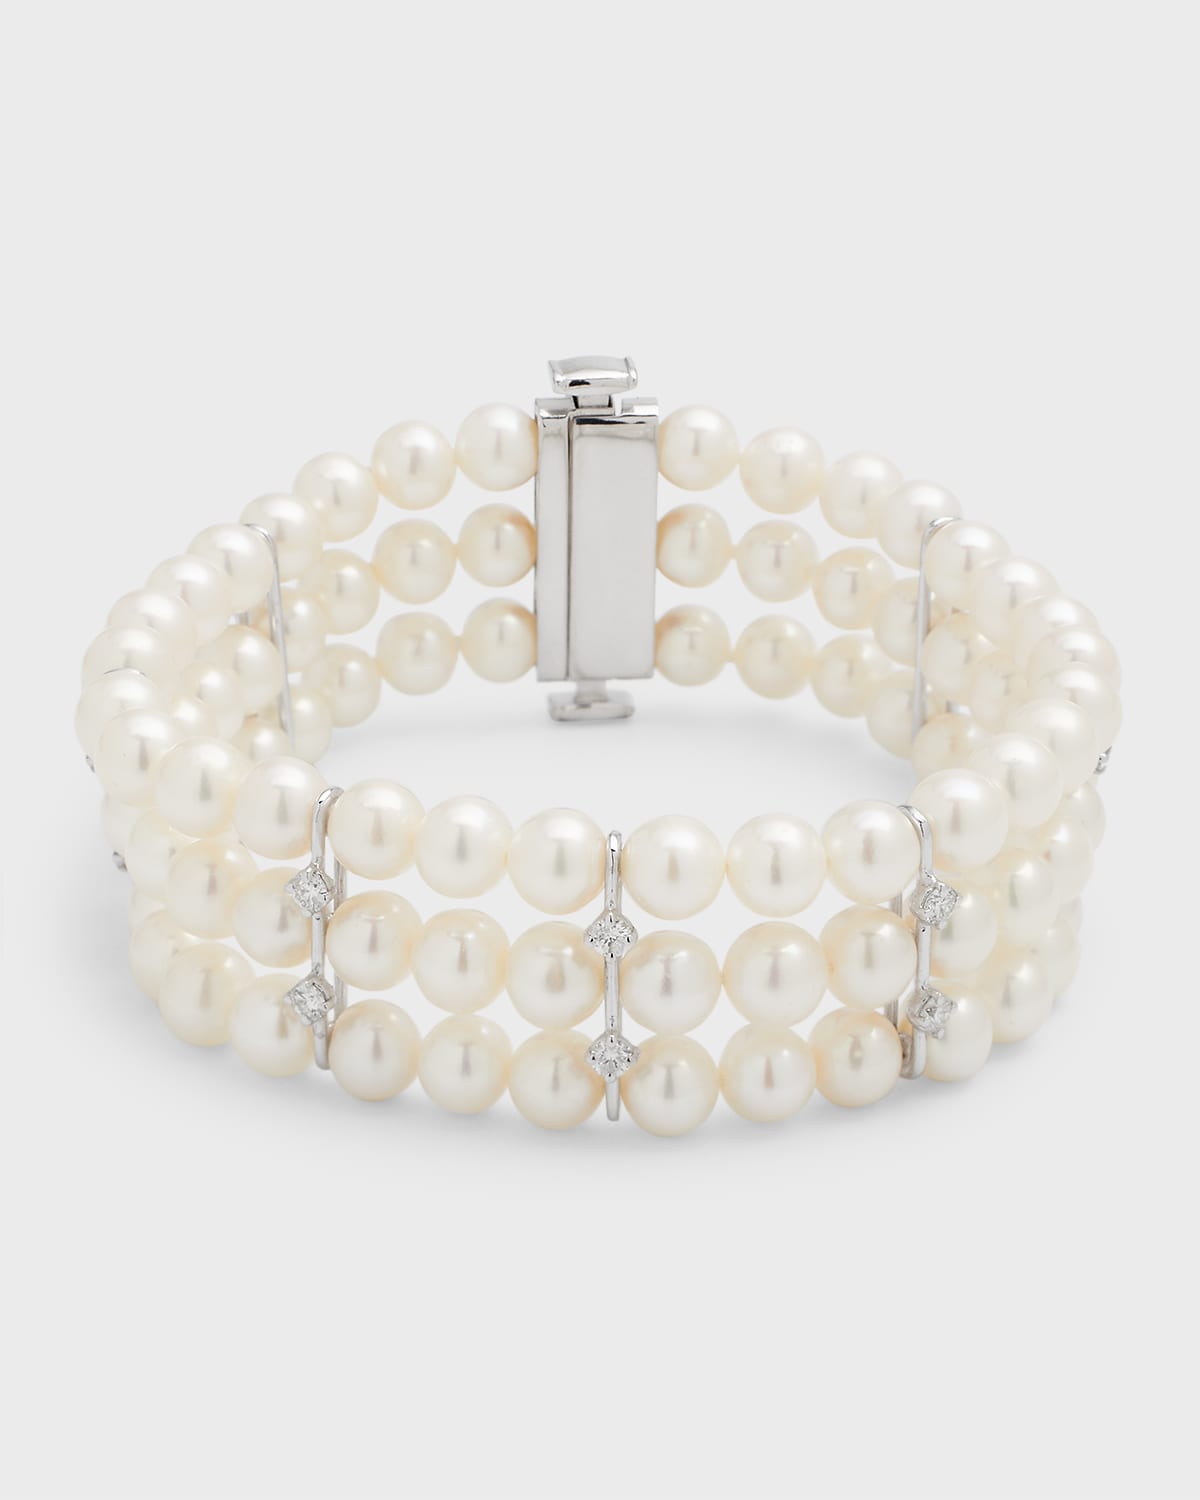 18K White Gold 3 Row Bracelet with Diamonds and Freshwater Pearls, 6-6.5mm